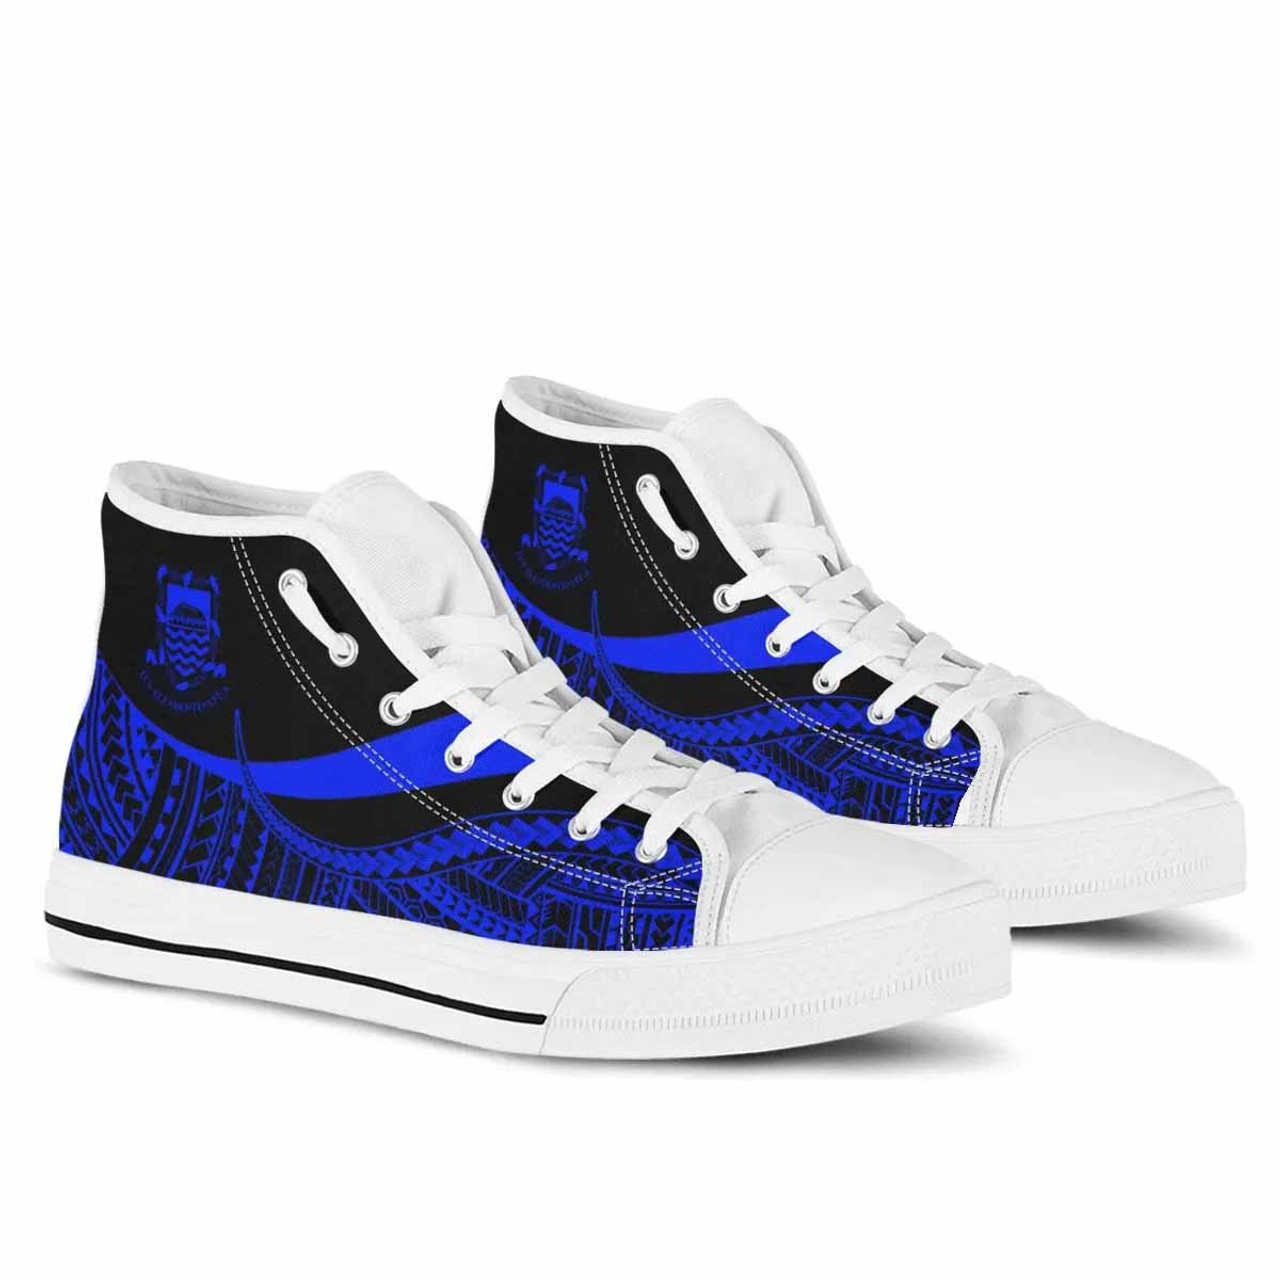 Tuvalu High Top Shoes Blue - Polynesian Tentacle Tribal Pattern 6